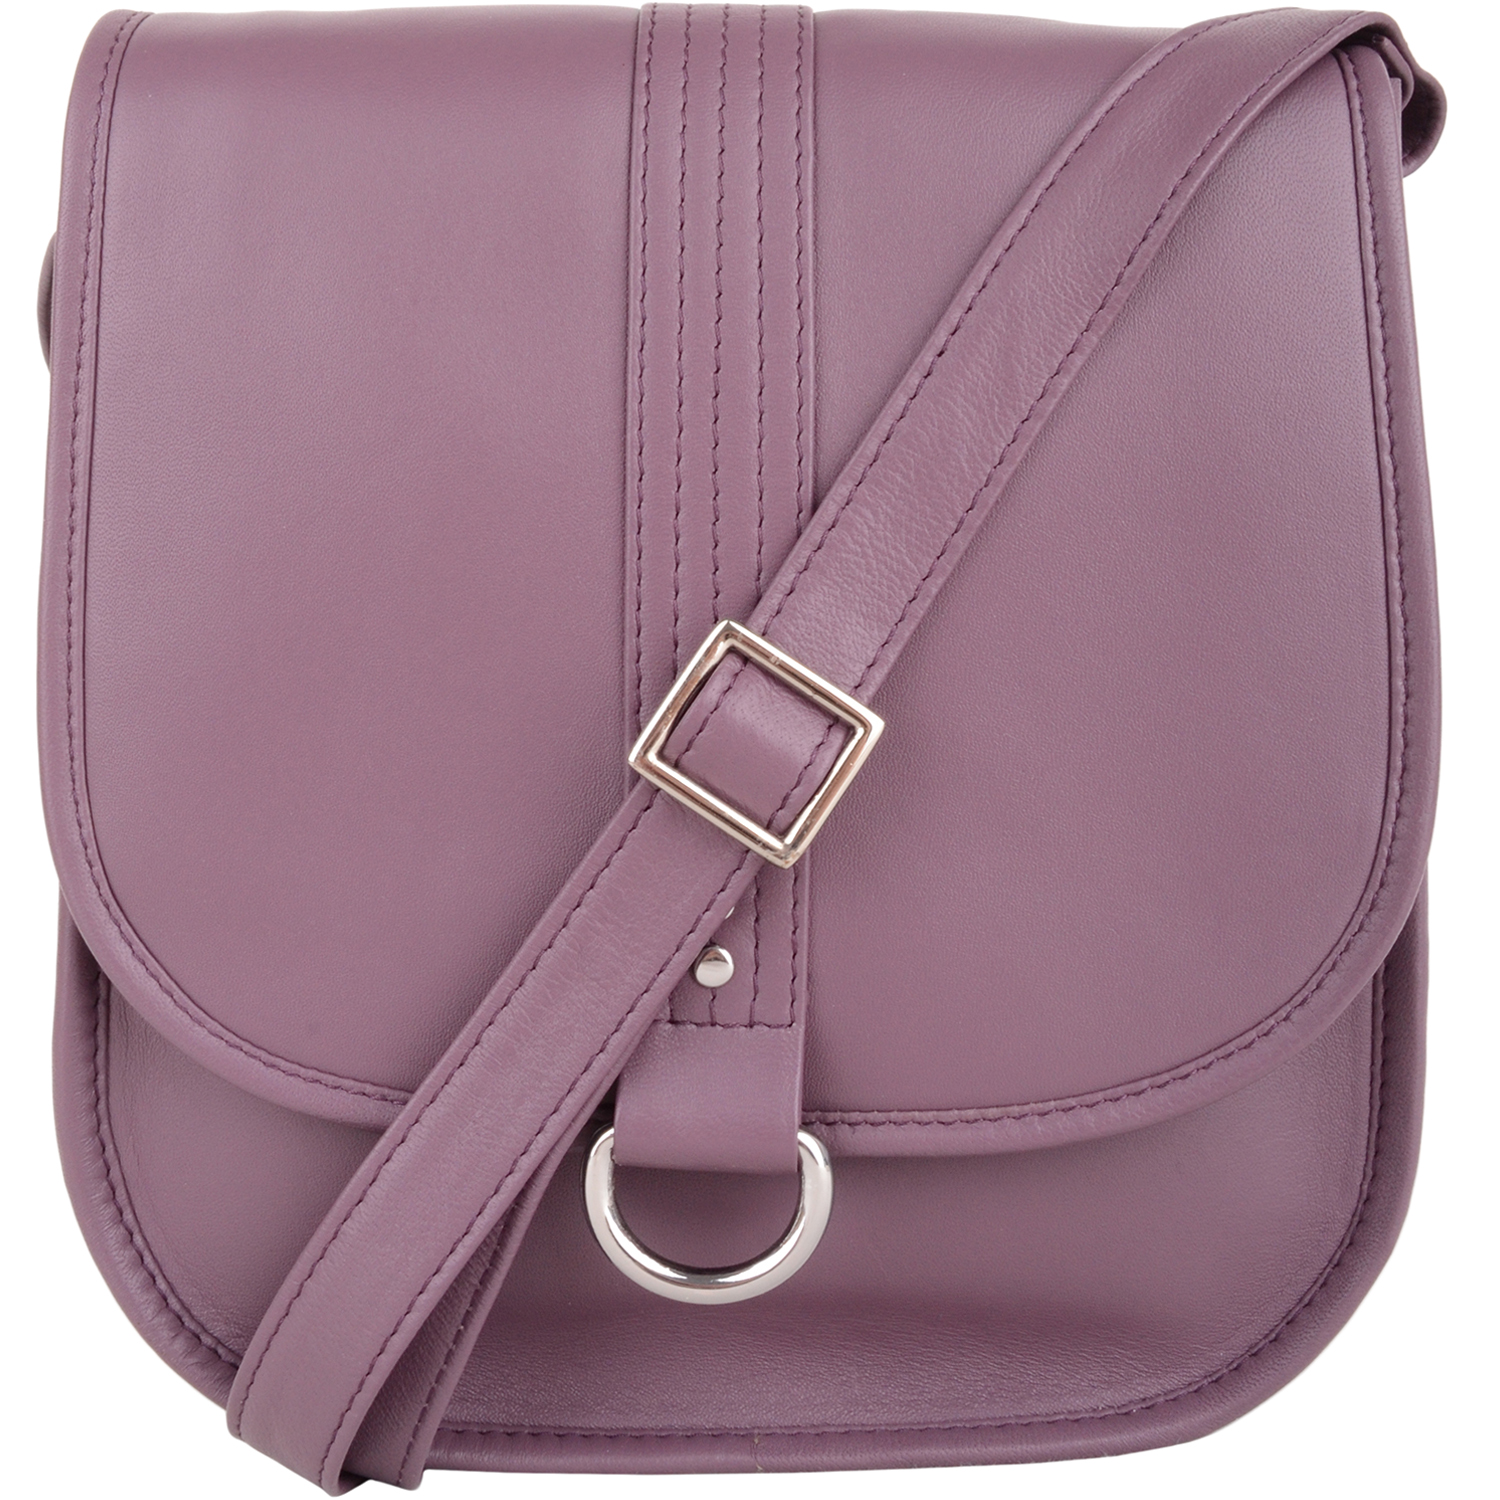 Leather Crossbody Bags for Women, Leather Shoulder Bag, Leather purse Cross  Body Bag Full Grain Leather with Adjustable Strap (burgundy): Handbags:  Amazon.com